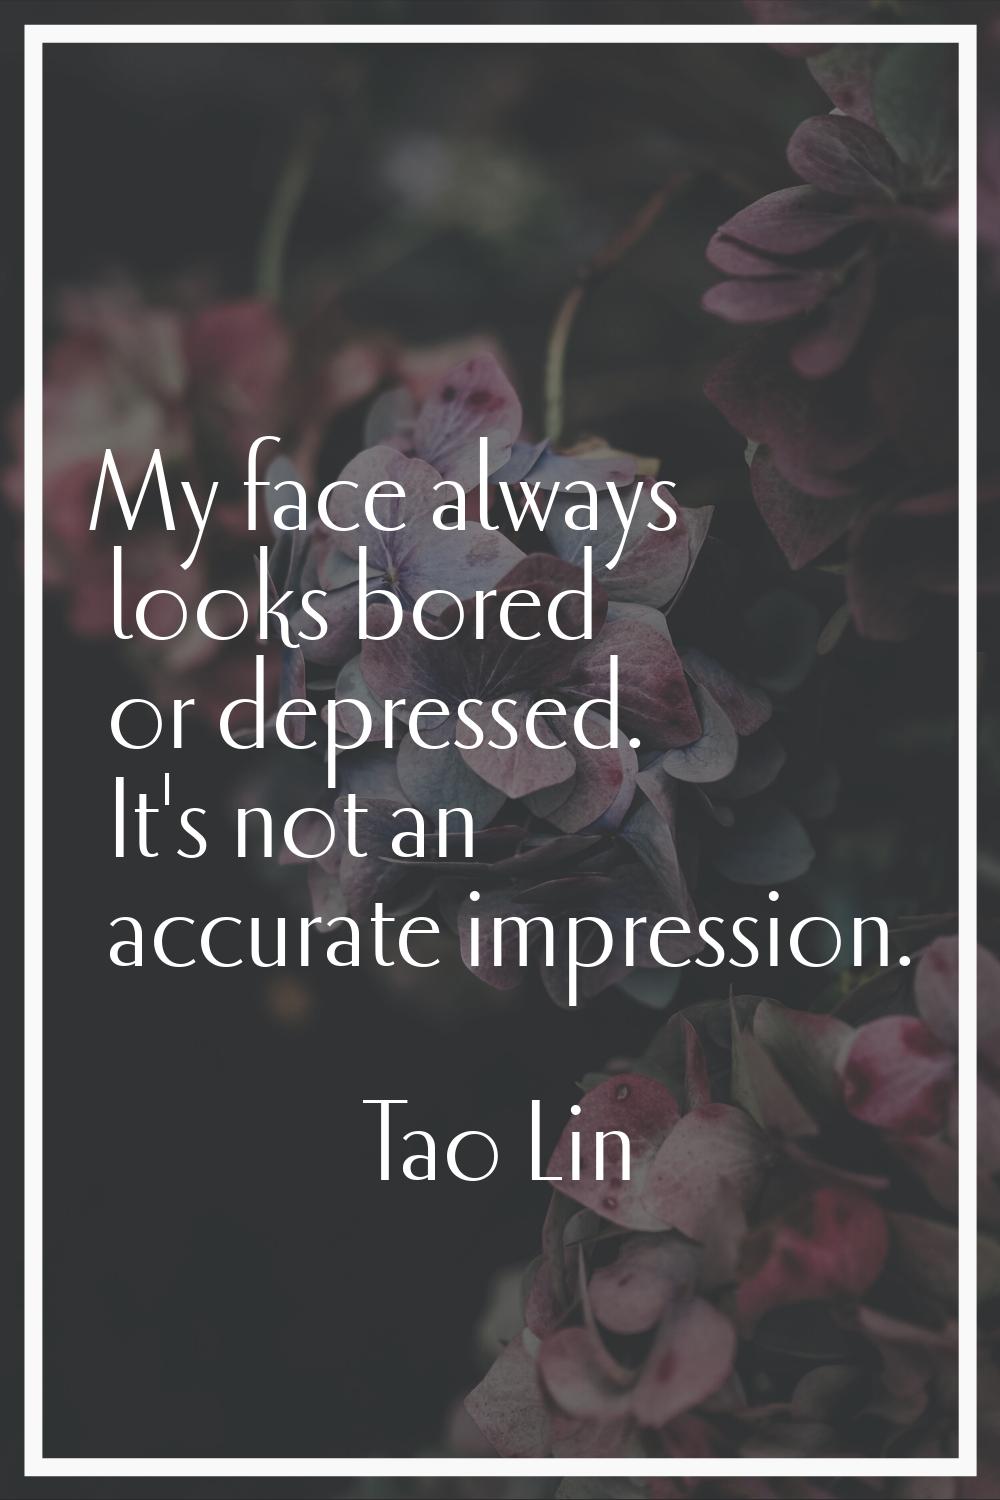 My face always looks bored or depressed. It's not an accurate impression.